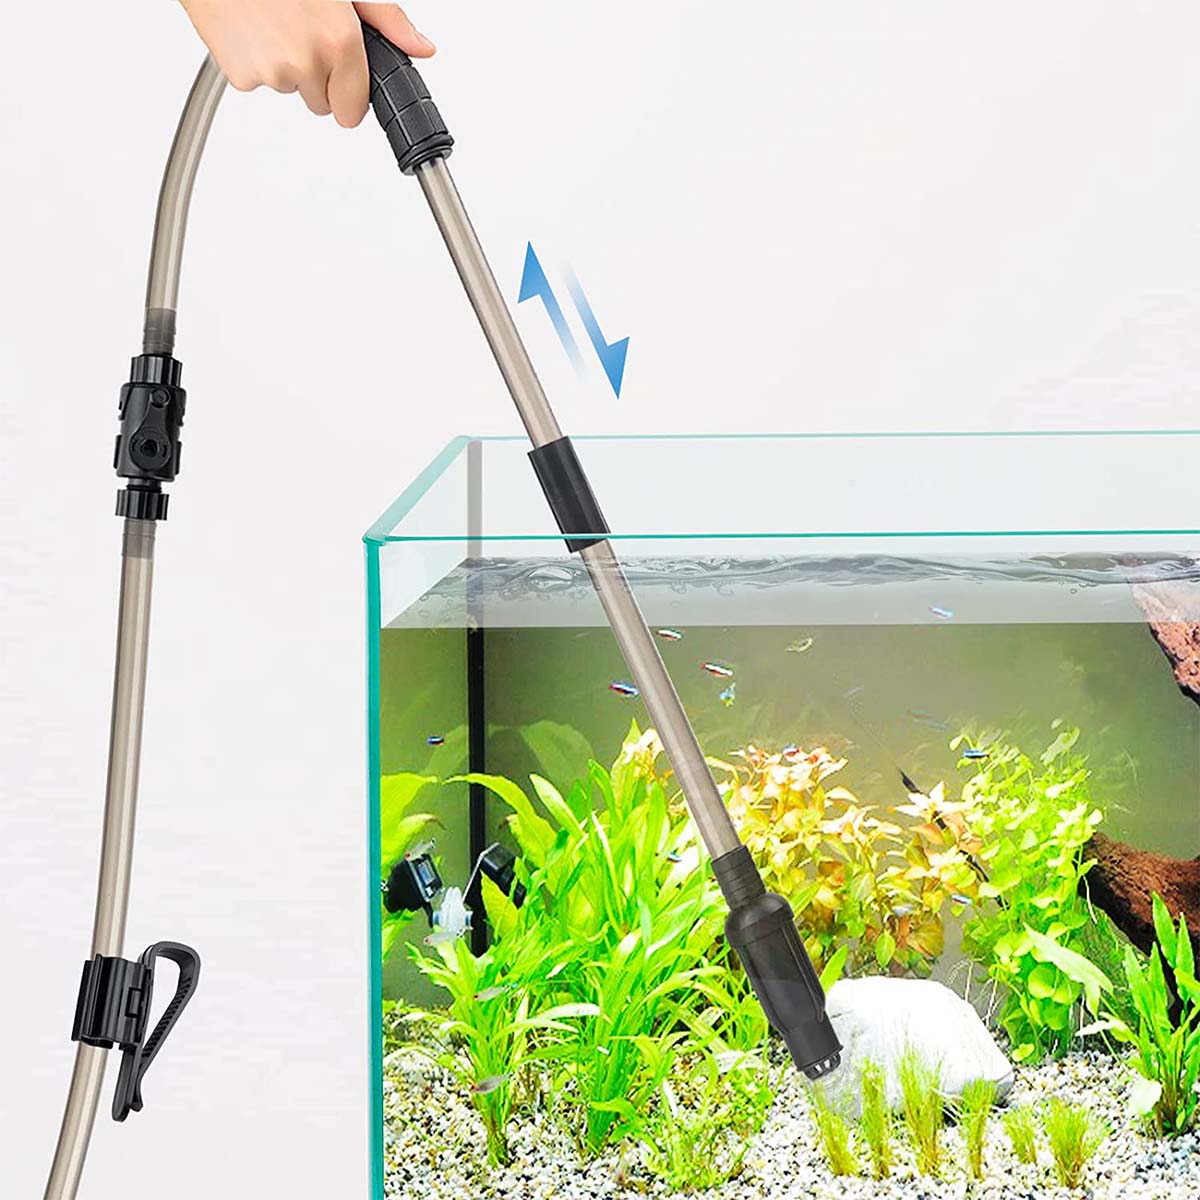 Fish Tank Water Changer Cleaning Pump Aquarium Cleaner Sand Washer